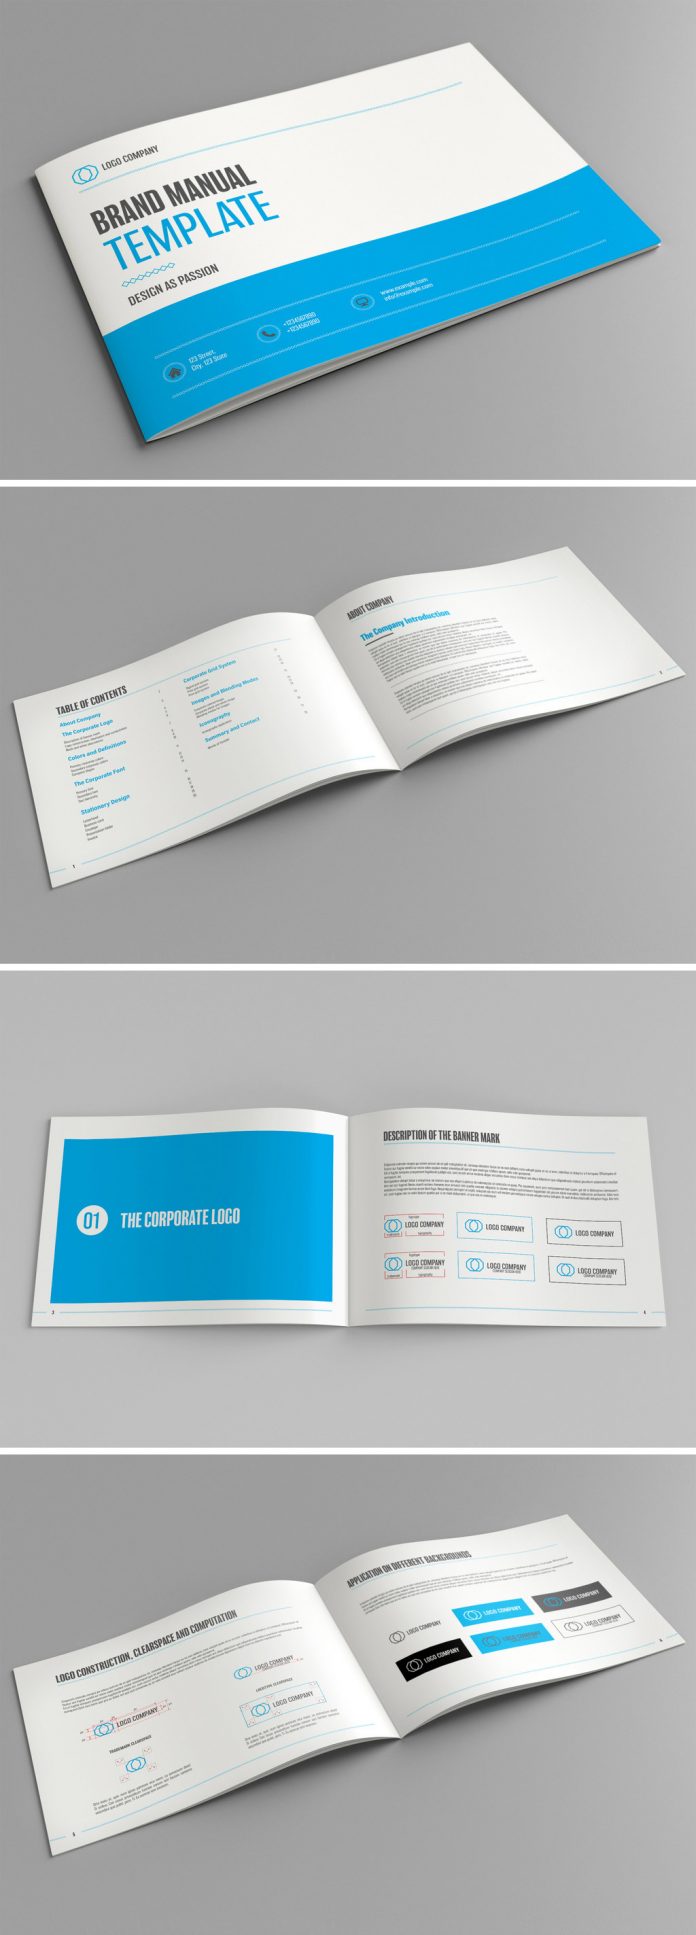 A brand manual and style guide template for Adobe InDesign.